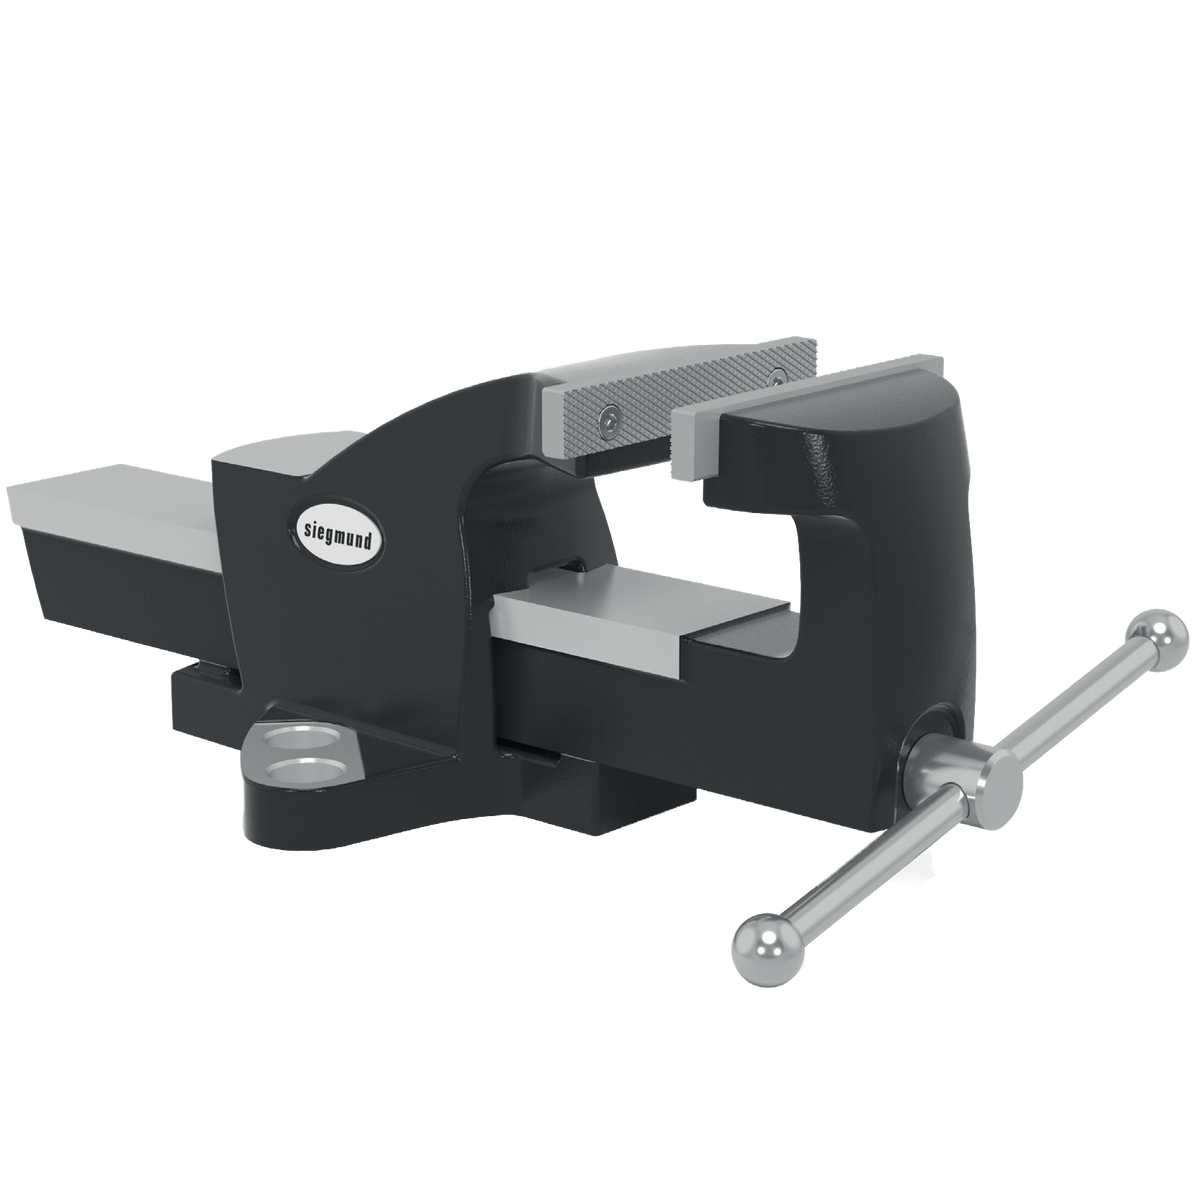 US004330: 5-7/8" Bench Vise with 1-1/10" Boreholes for the System 28 Imperial Series Welding Tables